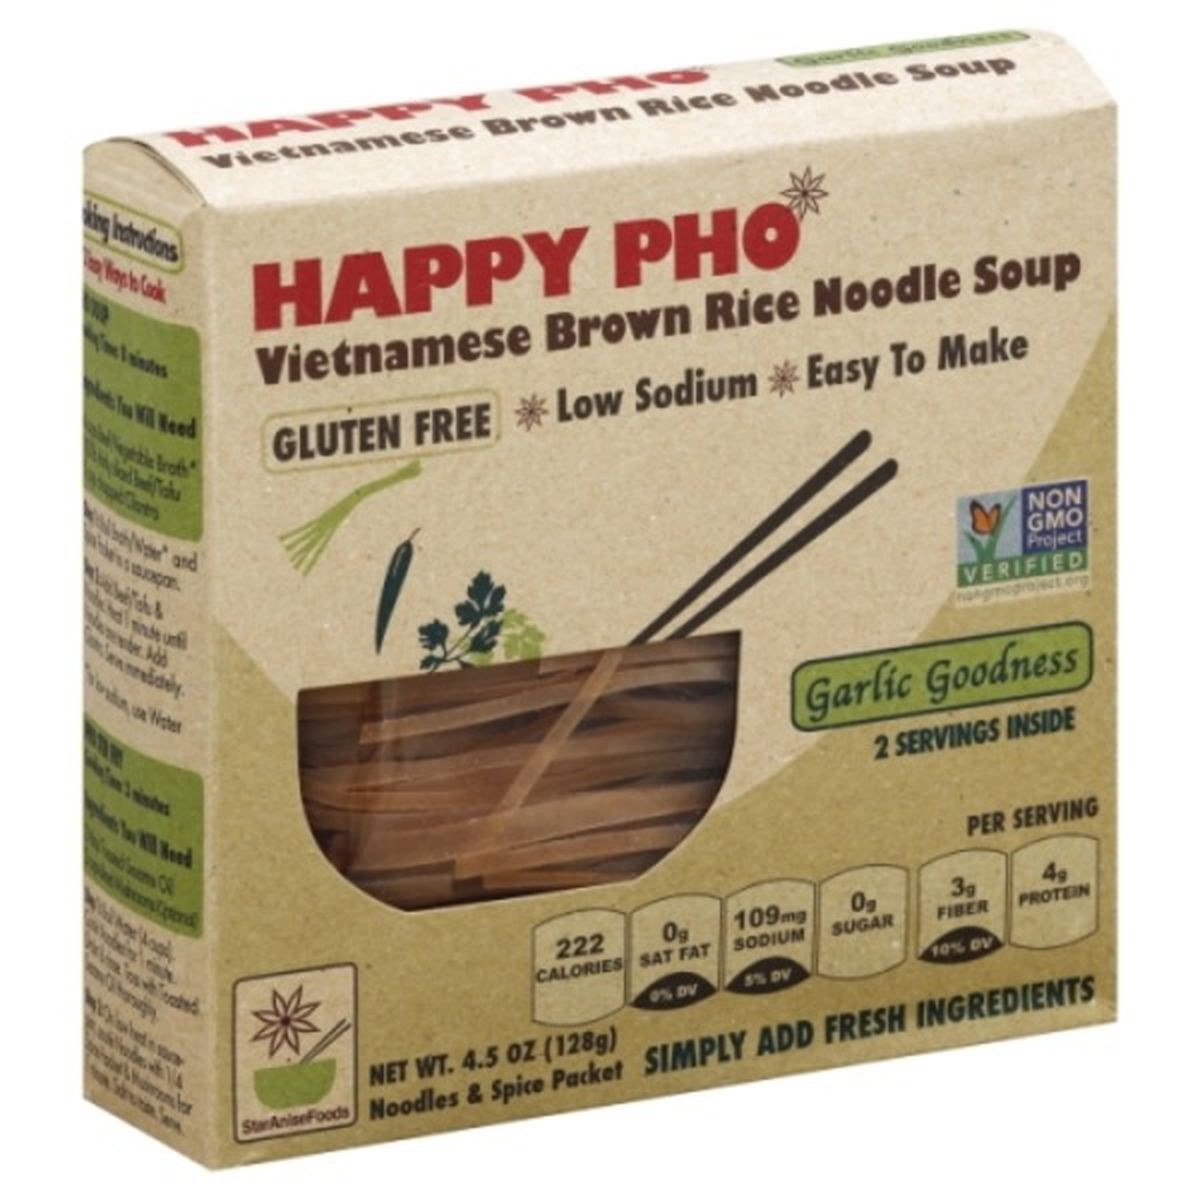 Calories in Happy Pho Vietnamese Brown Rice Noodle Soup, Garlic Goodness